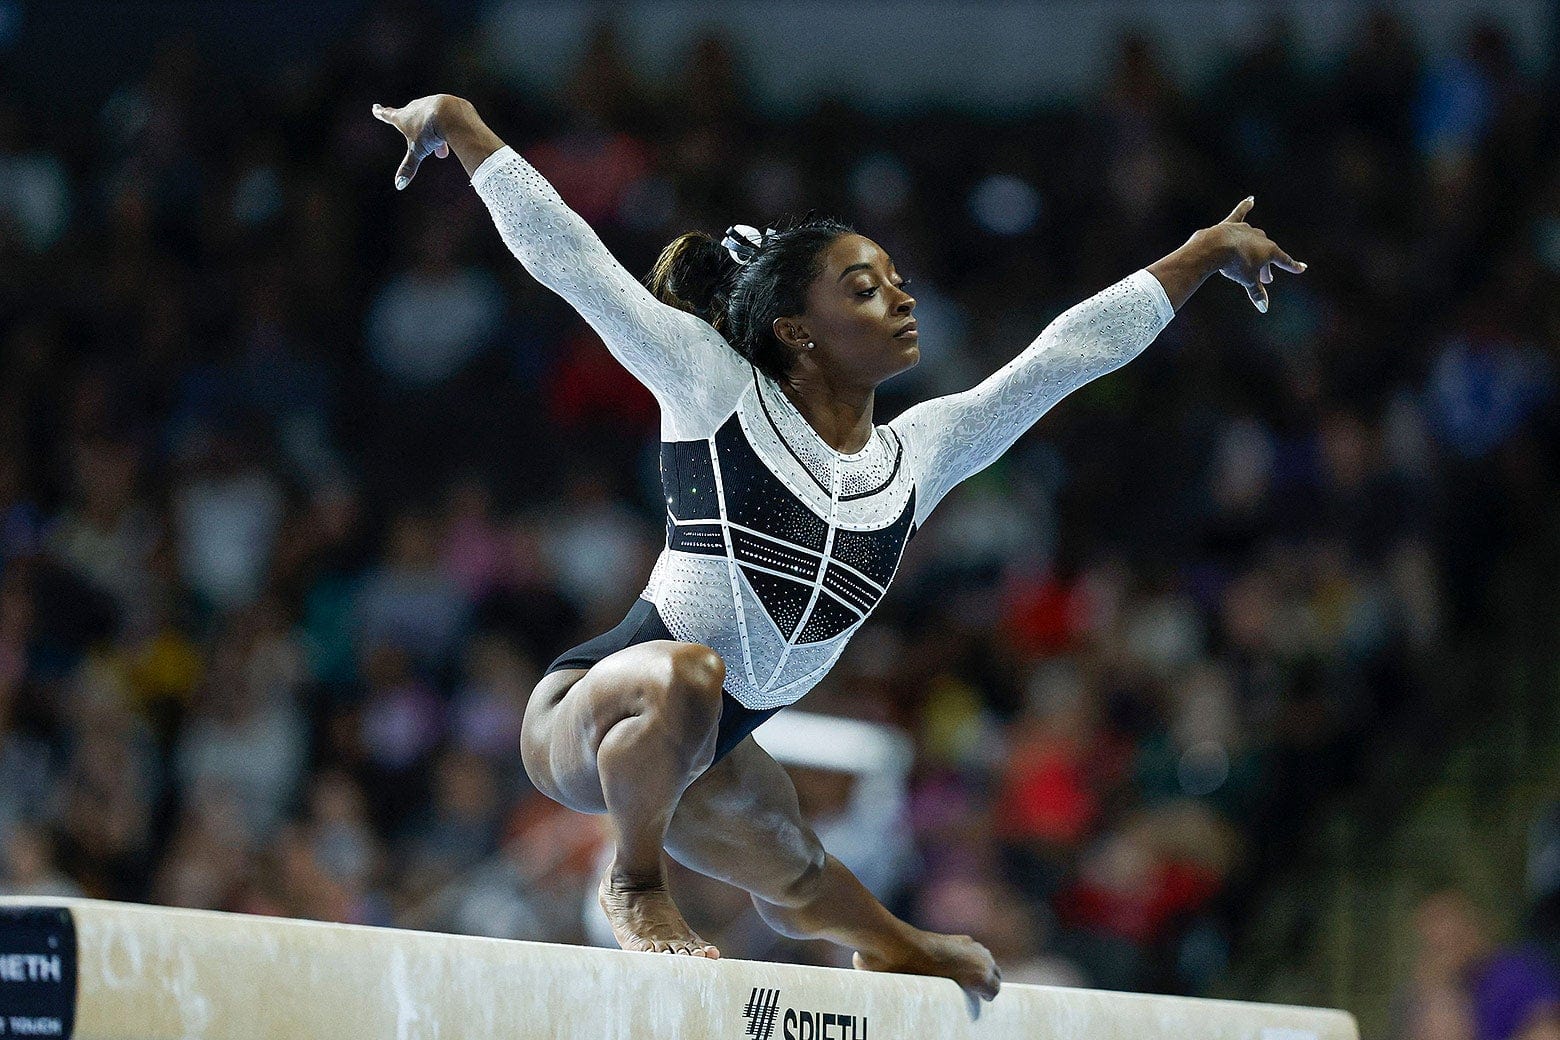 Frederick Richard Poised to Become Youngest U.S. Olympic Gymnastics Trials Winner Since 1972